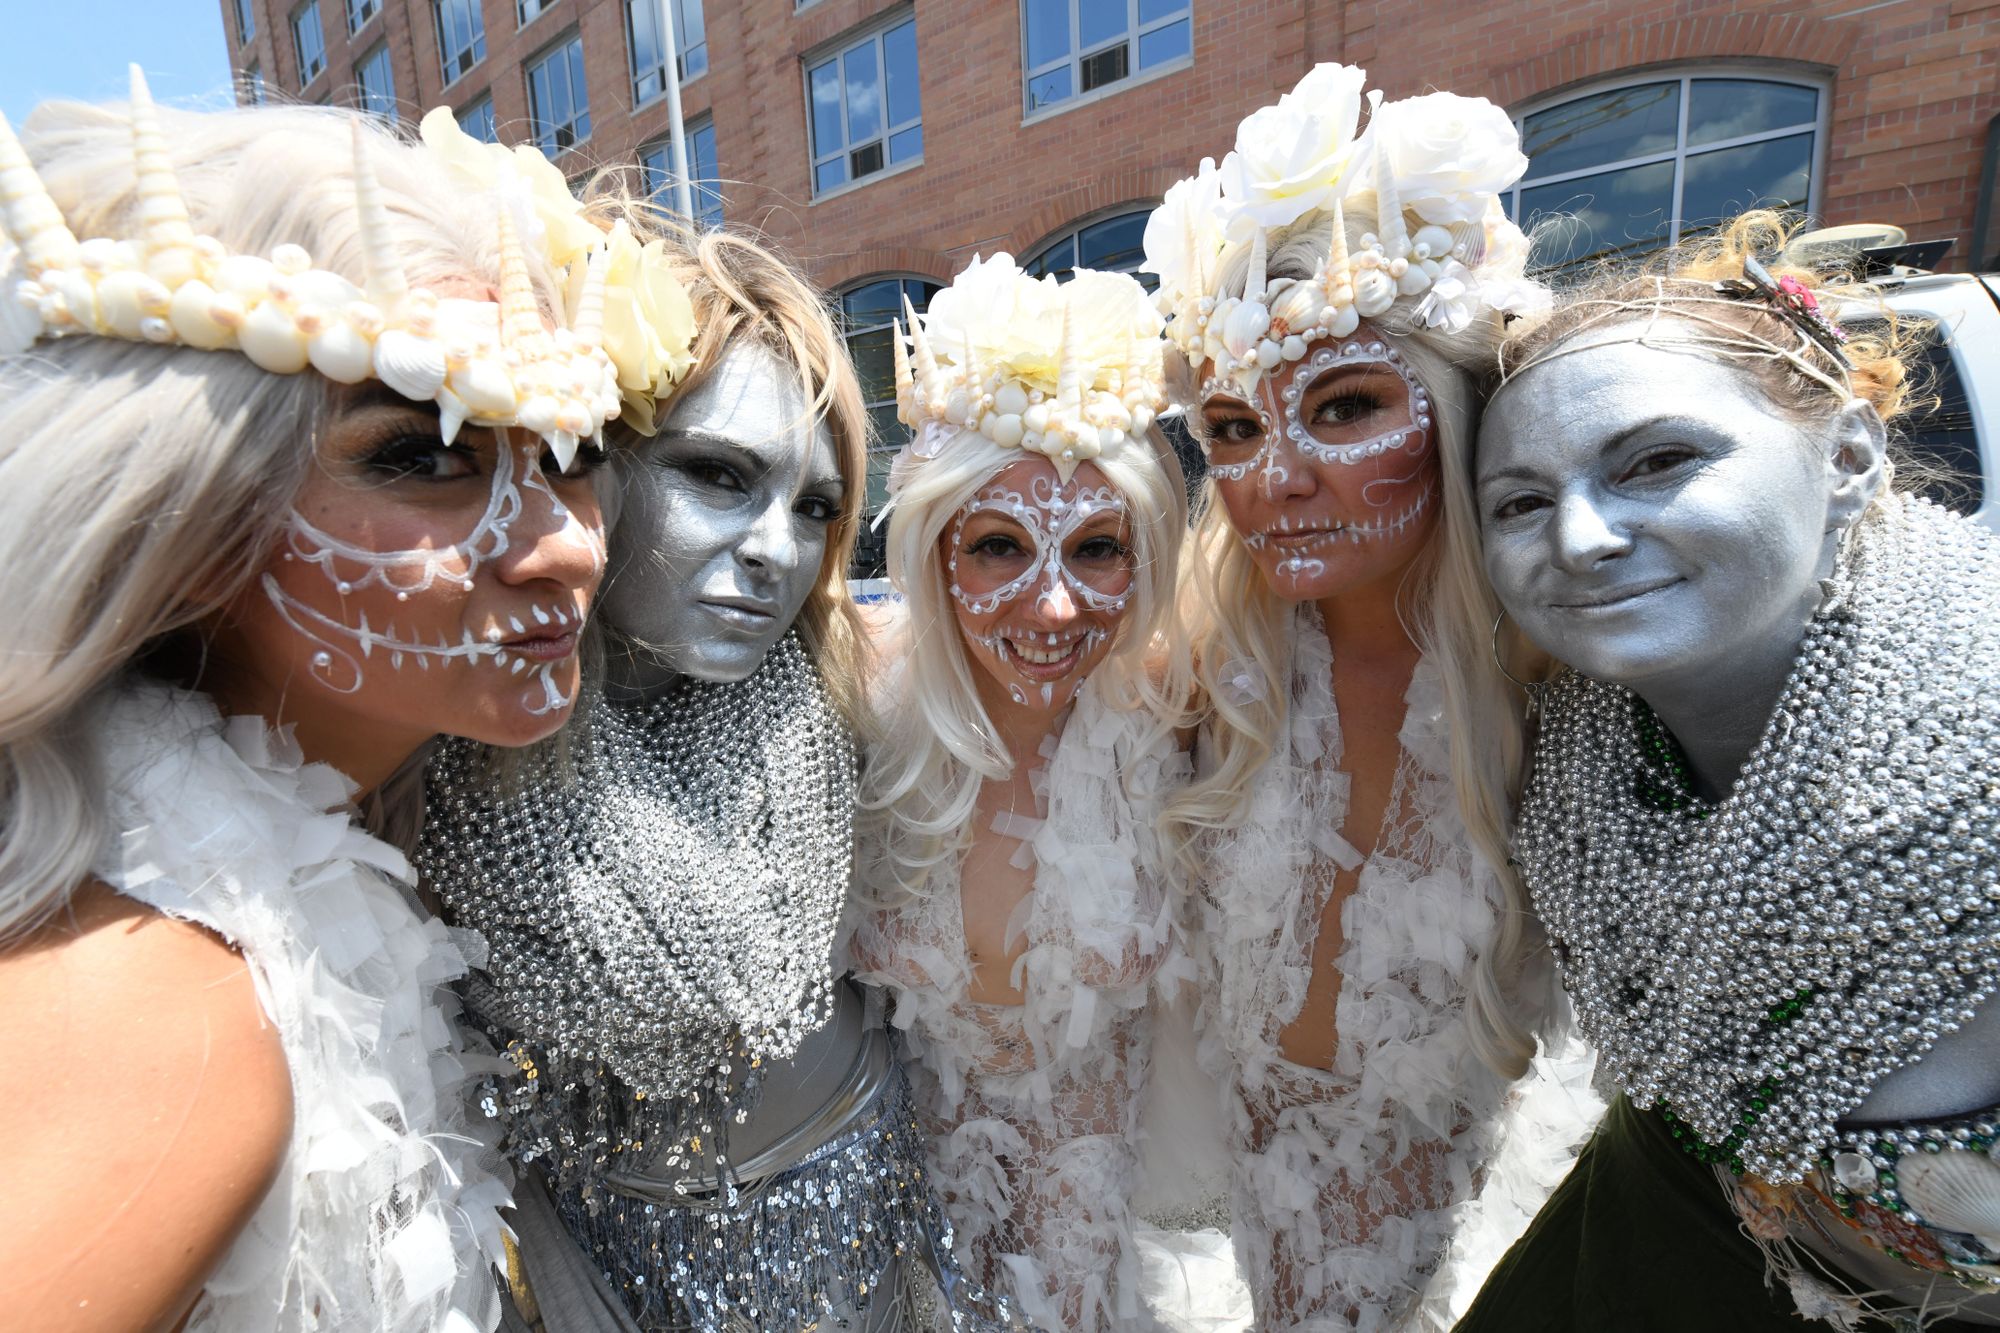 Mermaid Parade Is An Eclectic Love Festival Of The Arts